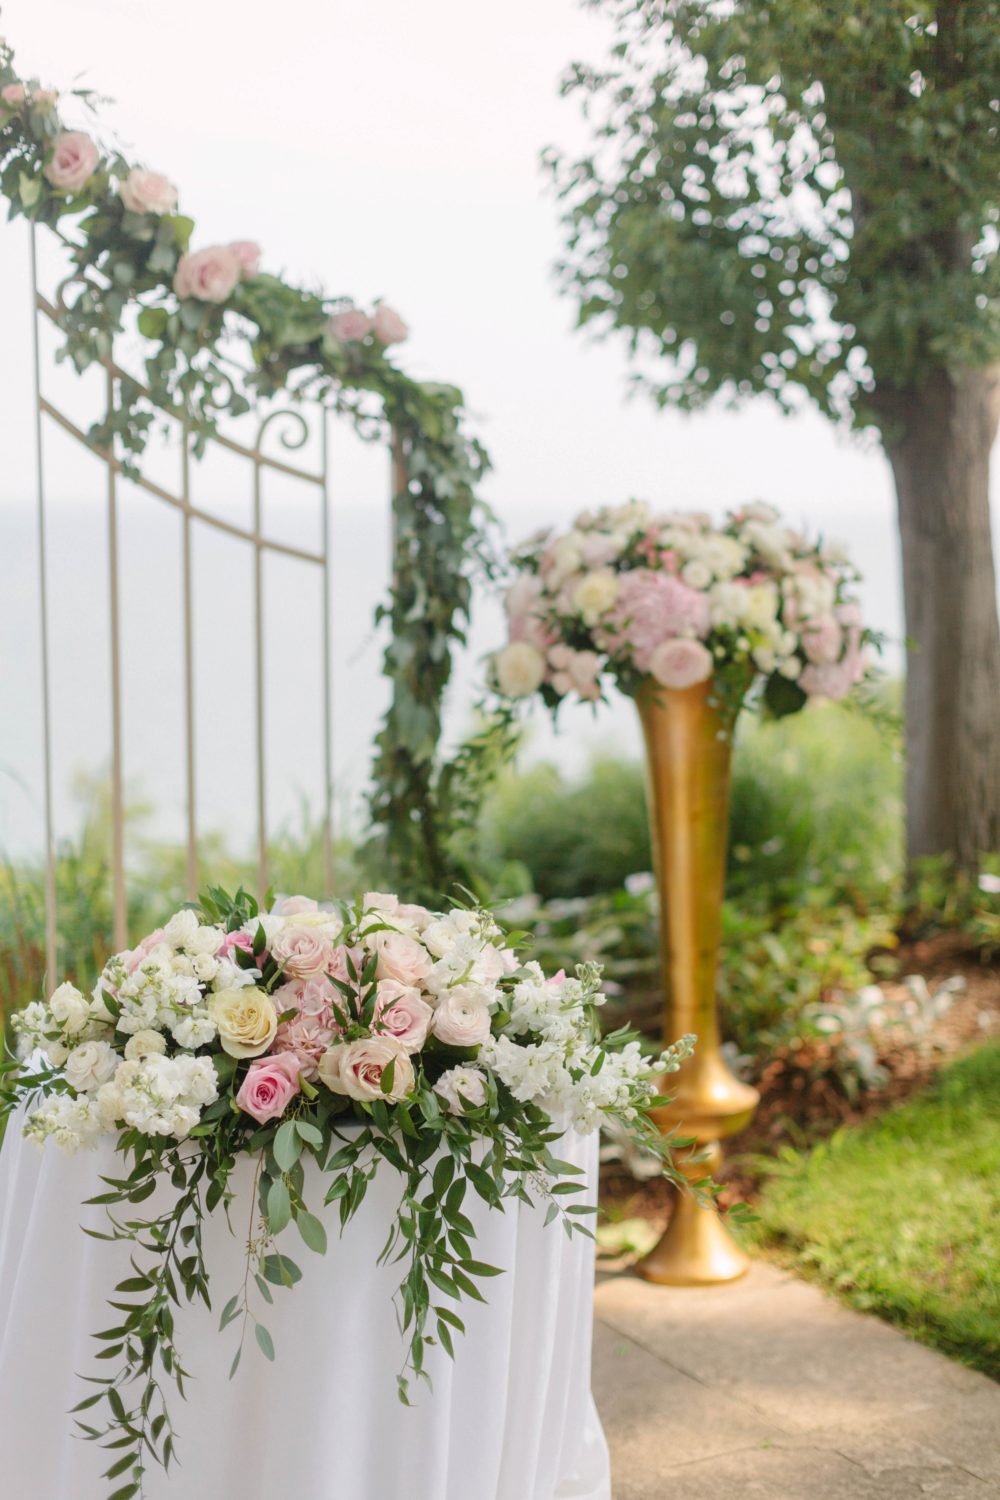 Roses and eucalyptus ceremony arch and centerpiece at outdoor wedding ceremony by Samantha Clarke Photography